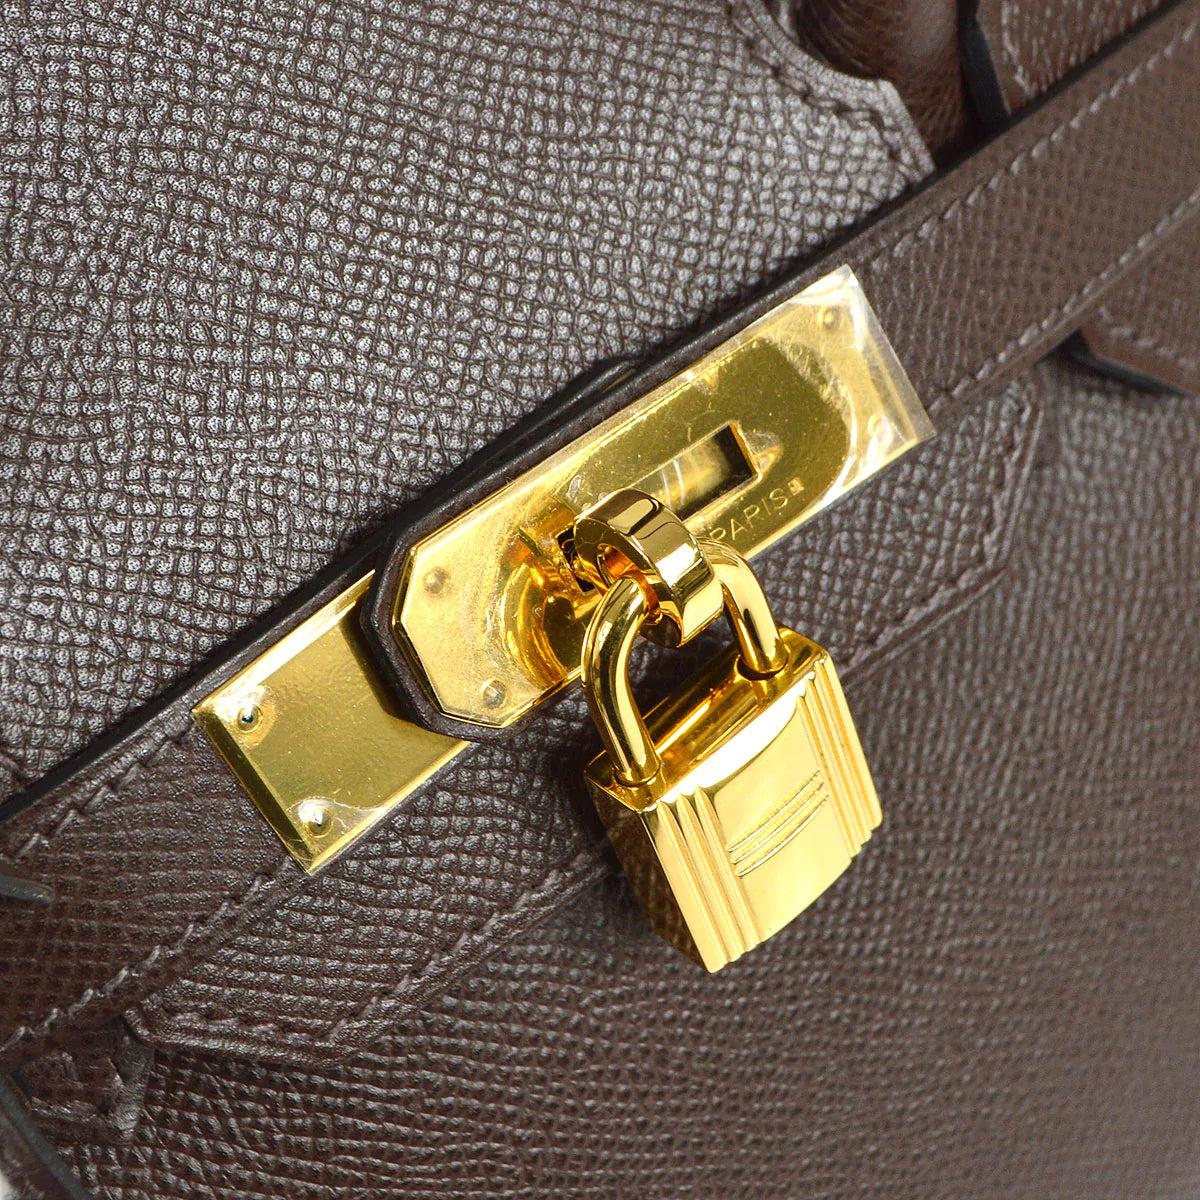 Pre-Owned Vintage Condition
From 2008 Collection
Veau Epsom Leather
Gold Hardware
Includes Padlock, Keys, Dust Bag,Rain Cover
W 11.8